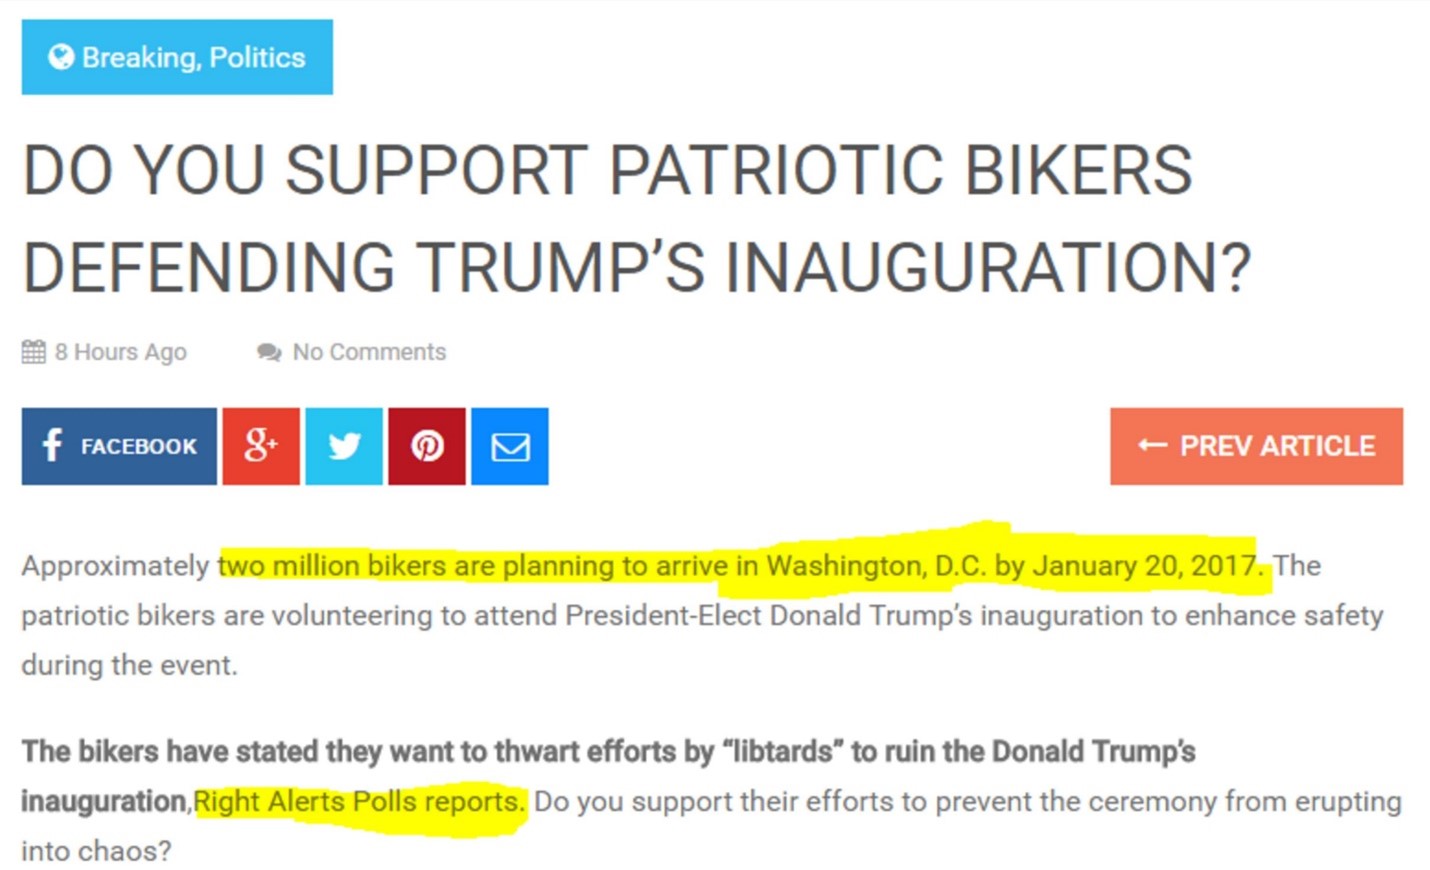 An article titled “Do You Support Patriotic Bikers Defending Trump’s Inauguration?” The article says that a source named Right Alerts Polls broke the story, but does not provide a link.